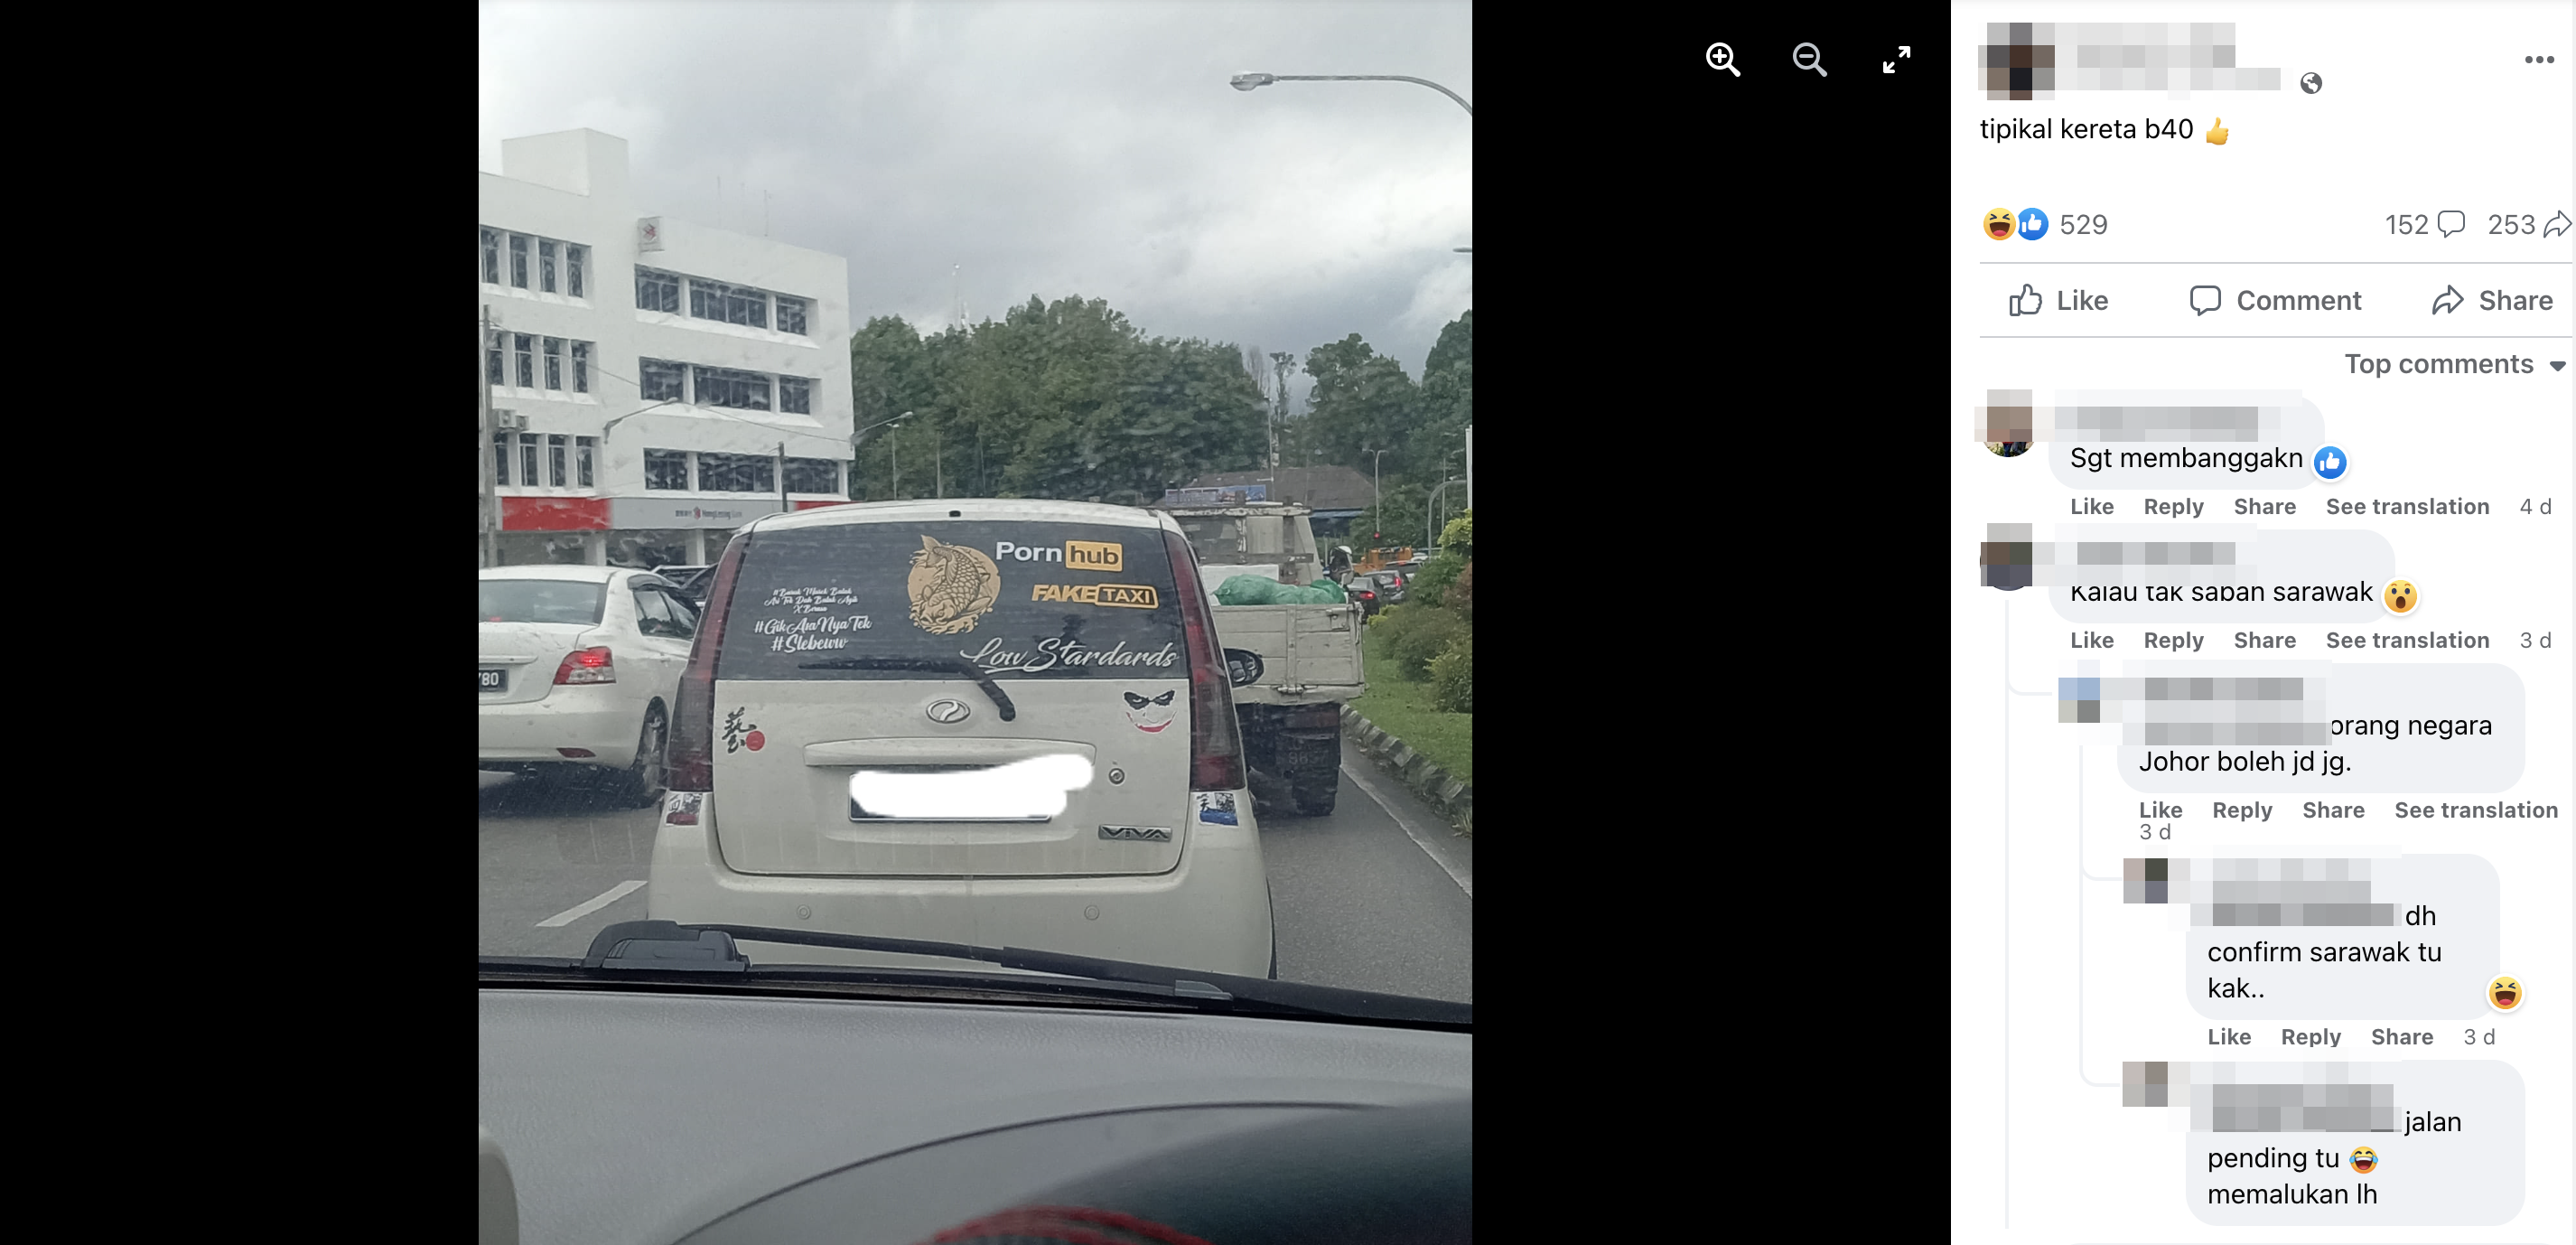 “bad example” - viva owner called out by netizens for displaying obscene bumper stickers | weirdkaya